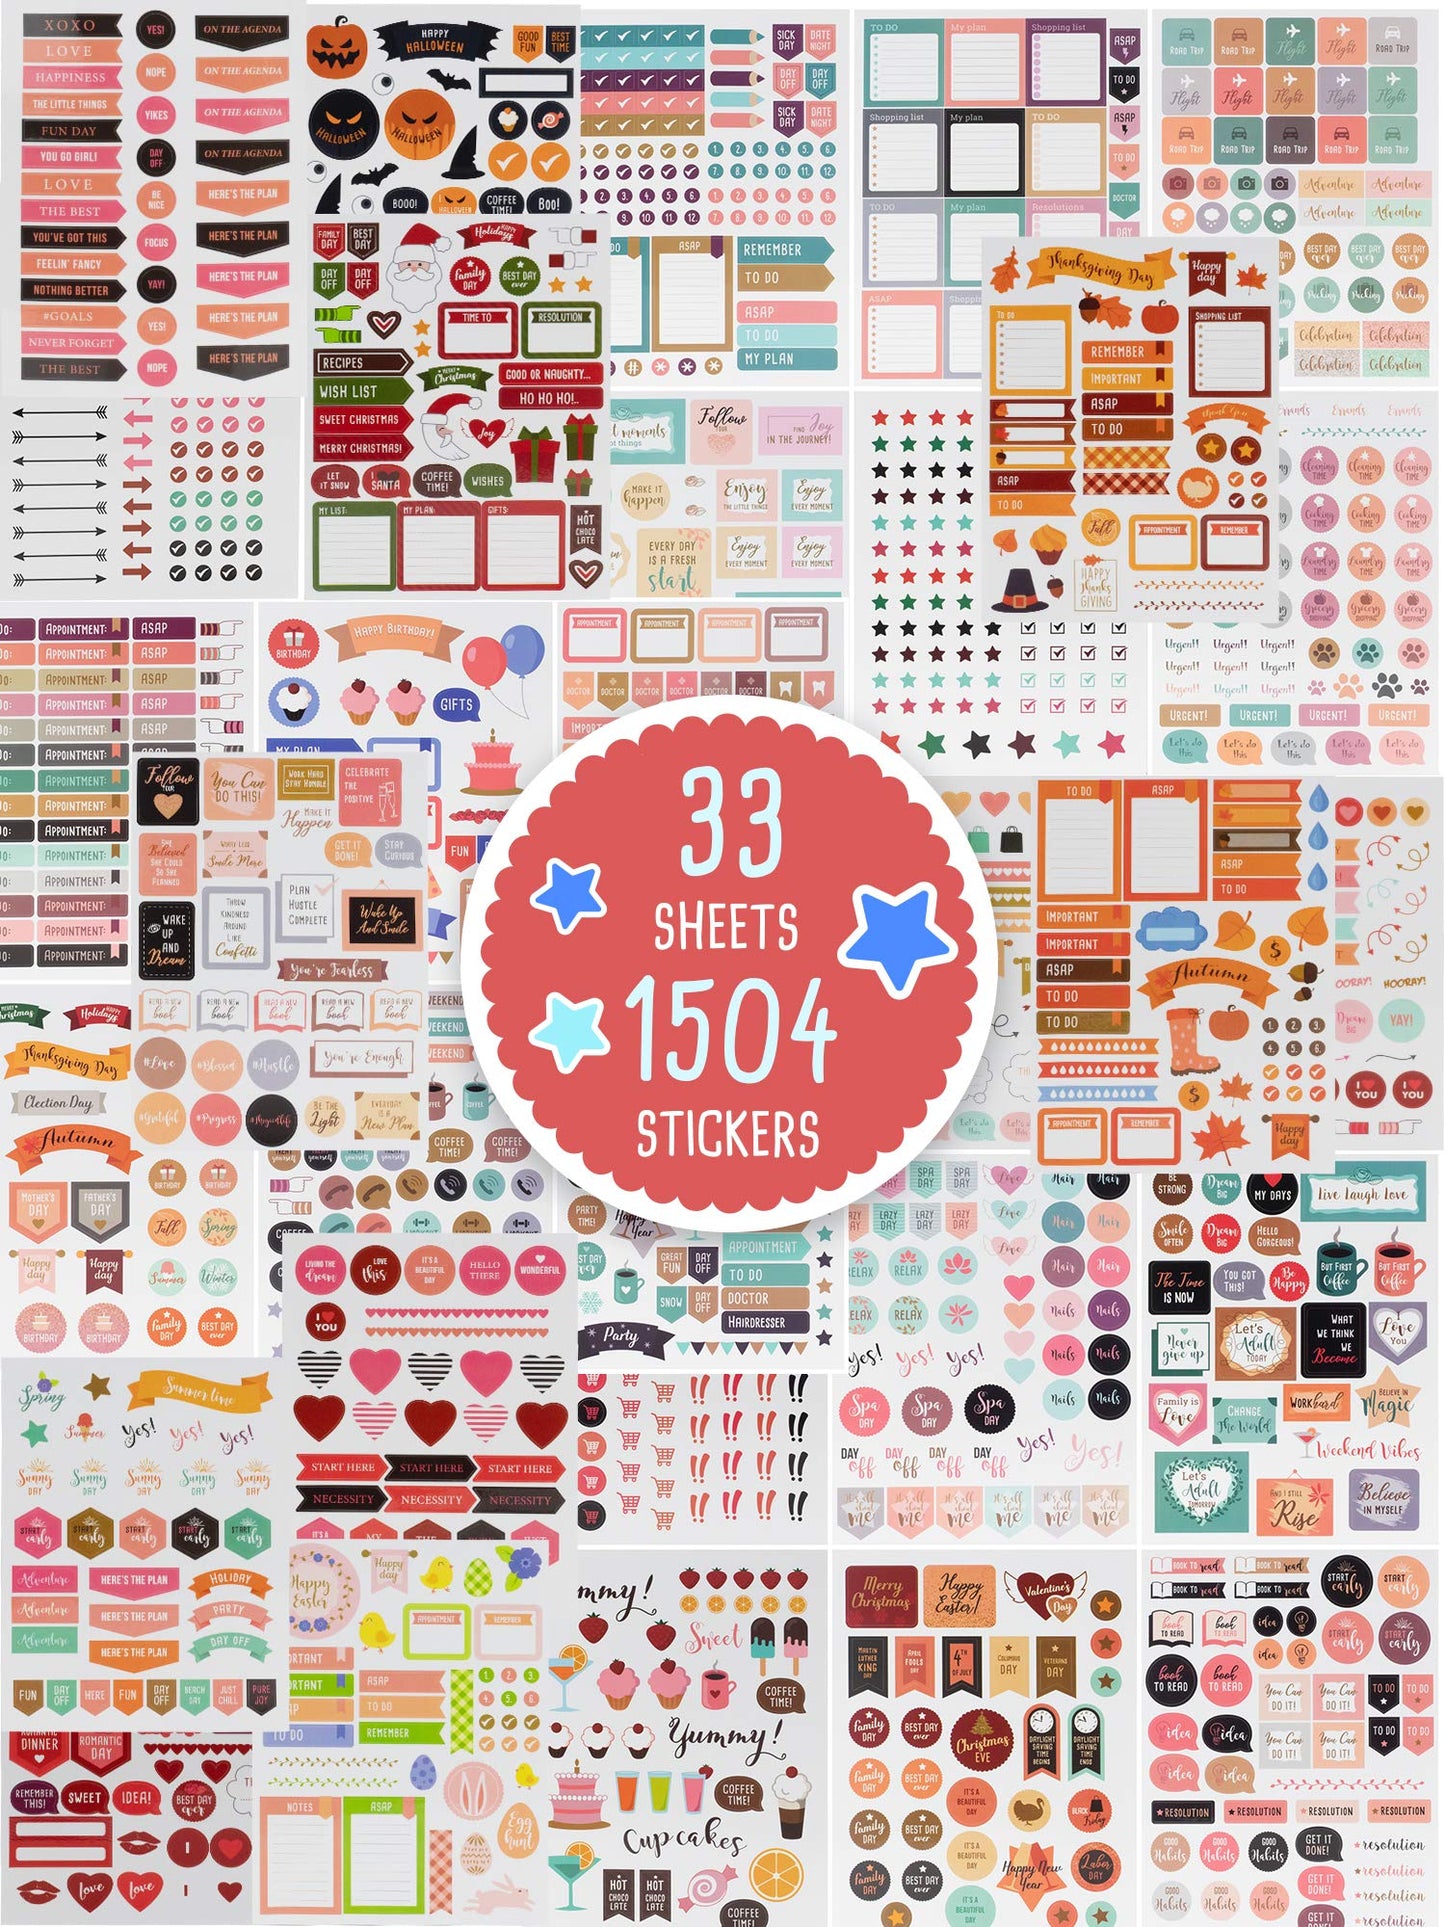 Aesthetic Planner Stickers - 1500+ Stunning Design Accessories Enhance and Simplify Your Planner, Journal, Calendar and Scrapbook